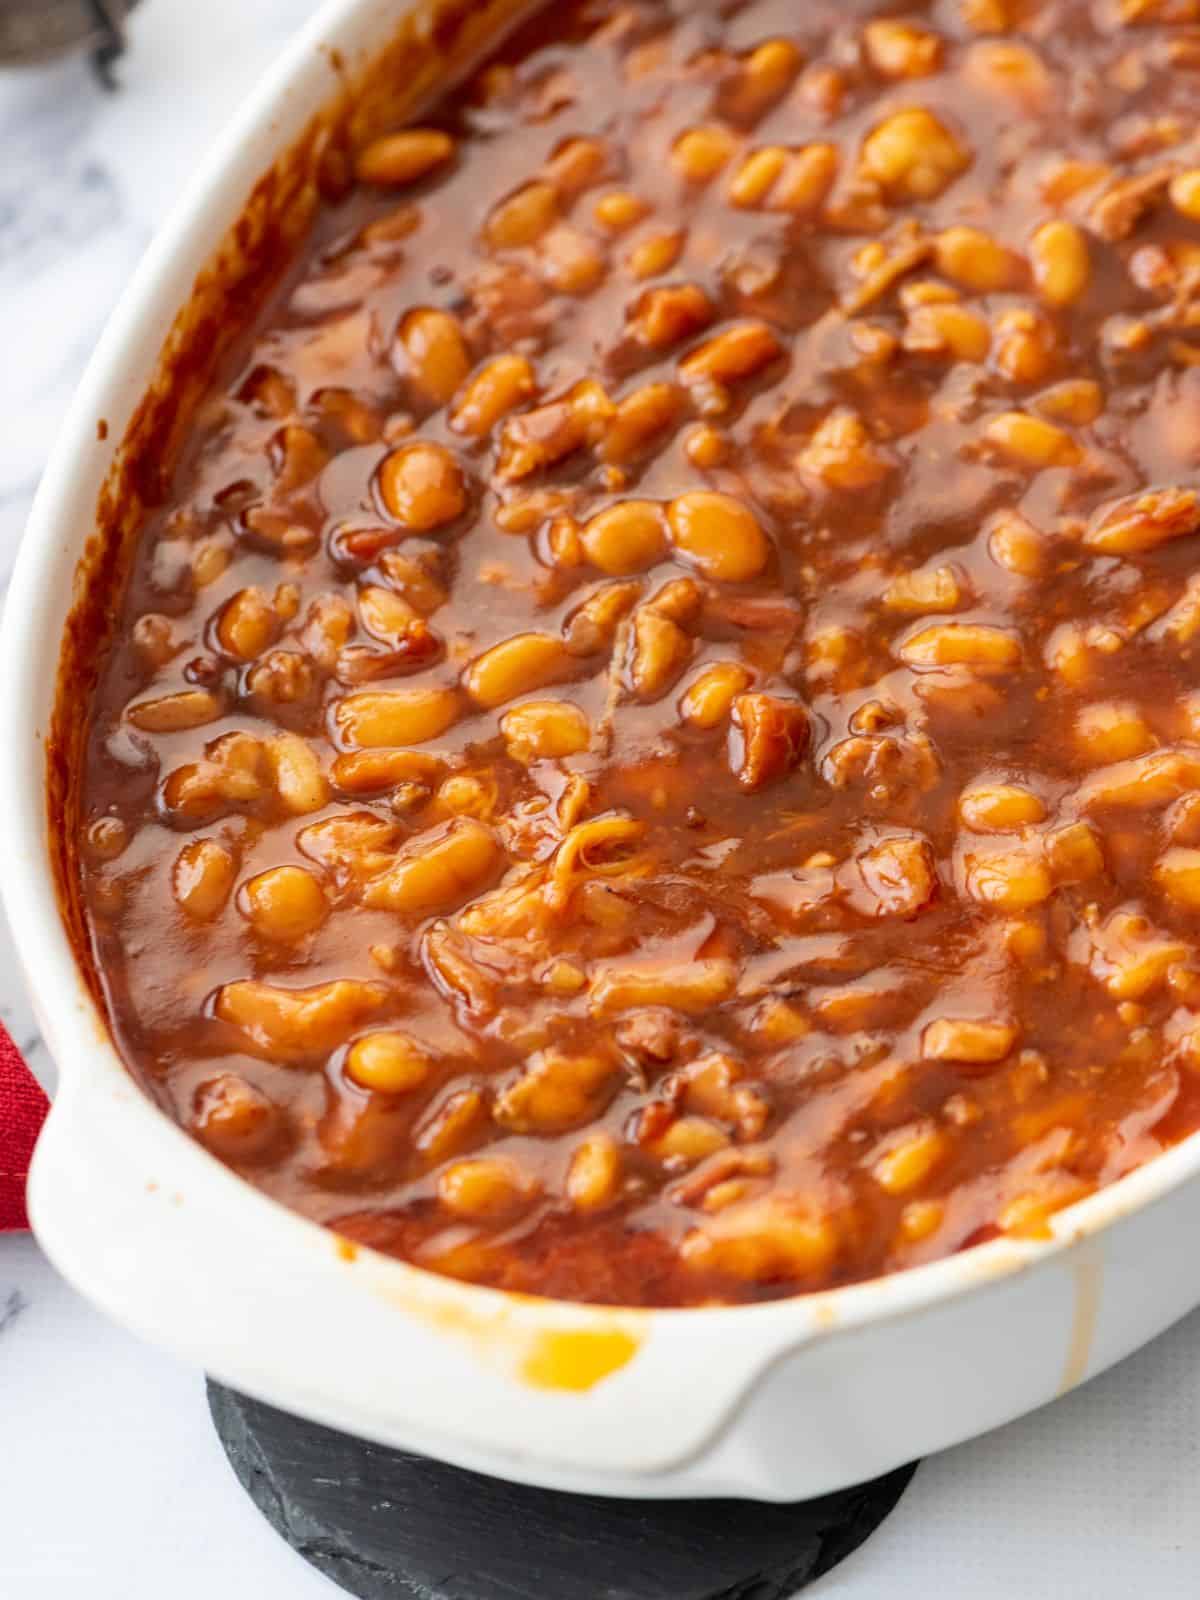 Homemade baked beans in large white casserole dish.